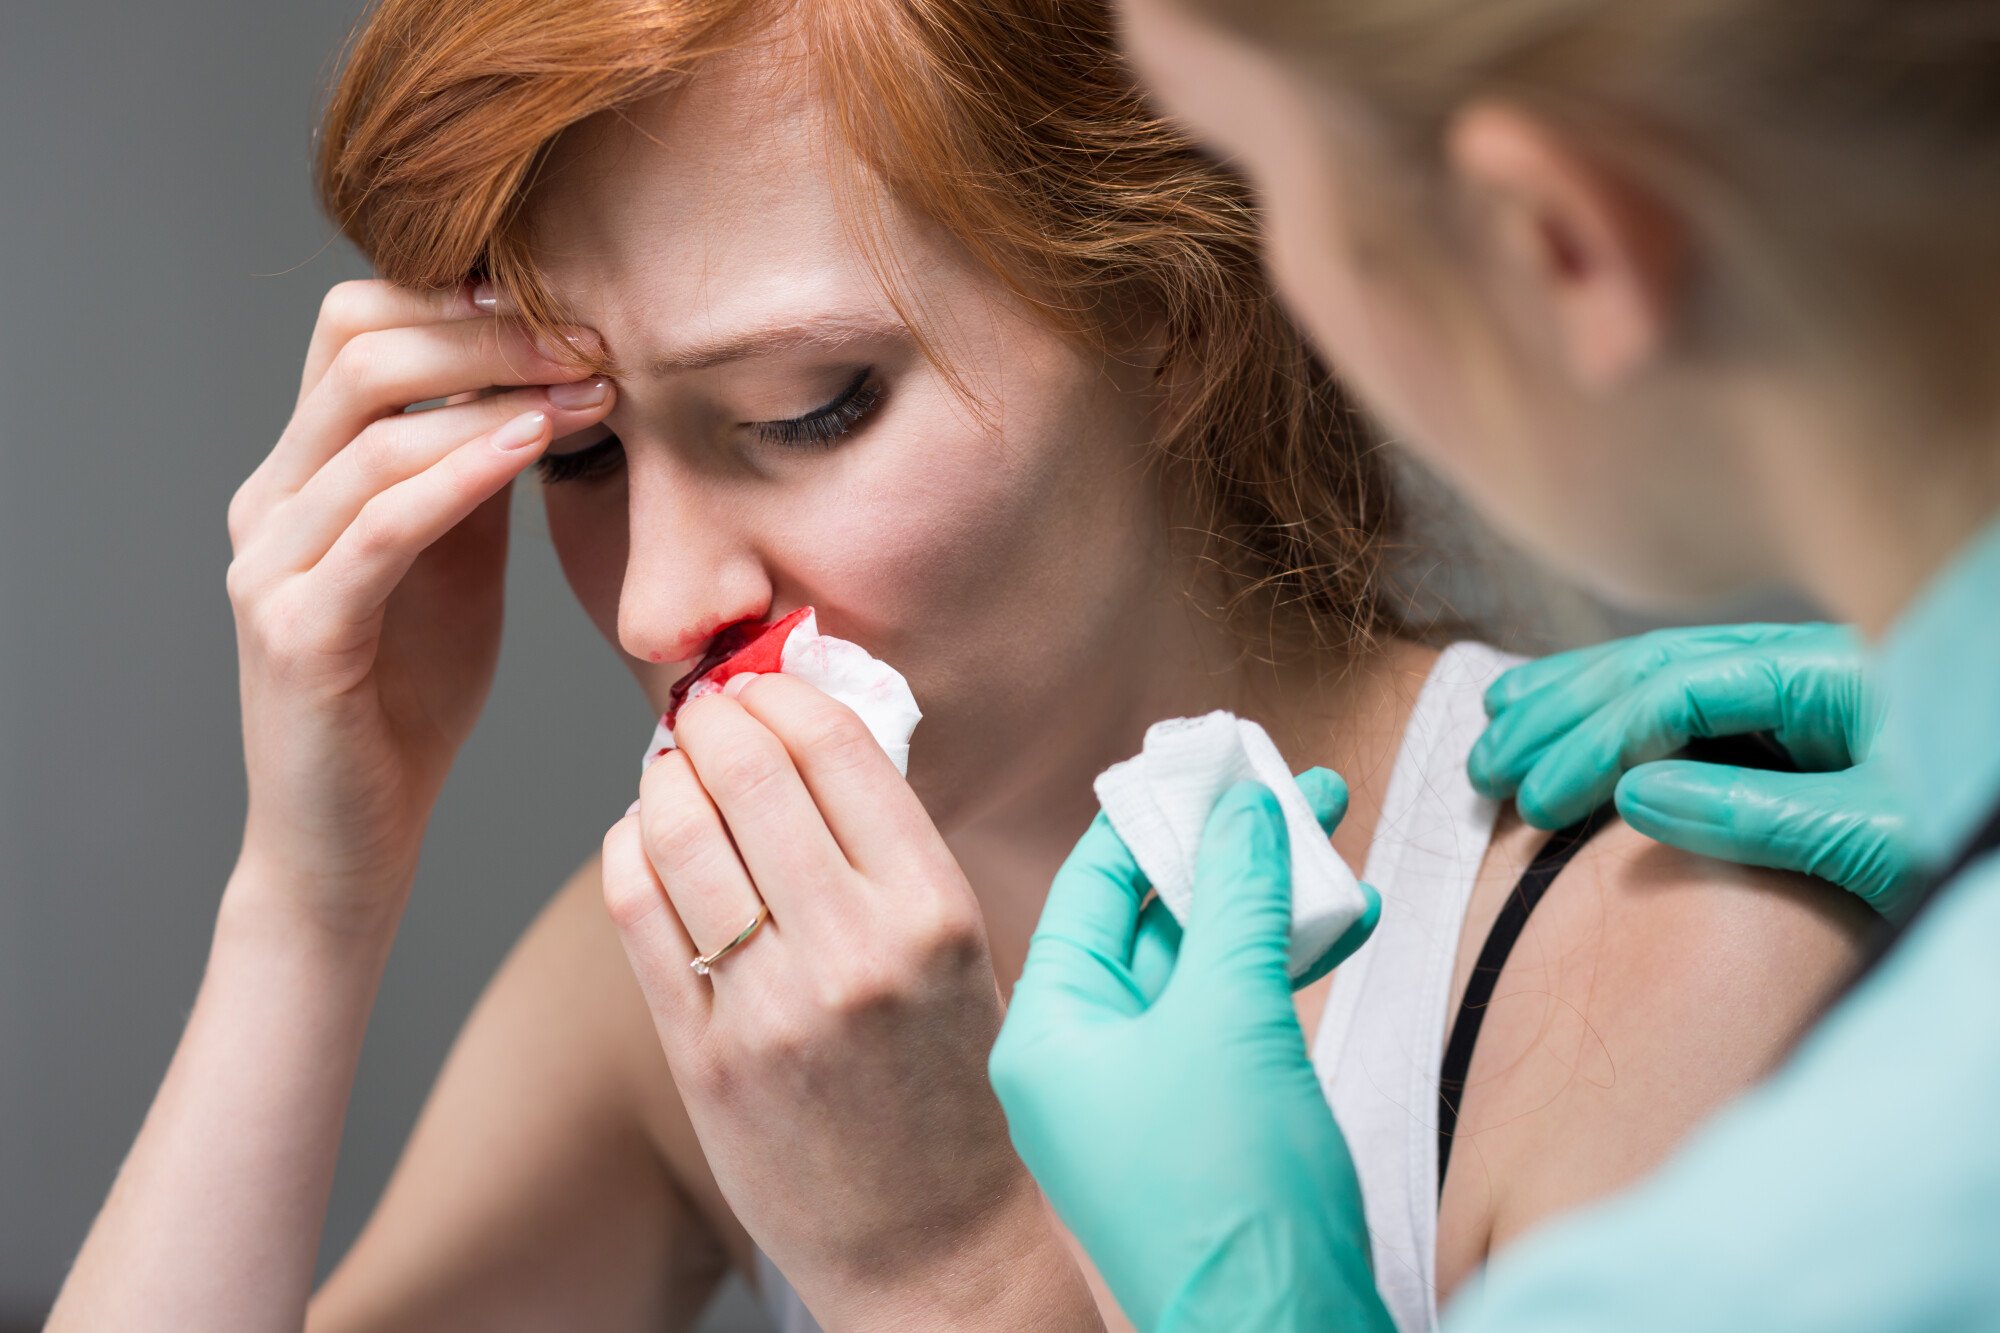 It's vital that you take quick action when bleeding from the nose following head trauma. Learn why and what to do with details from this article.